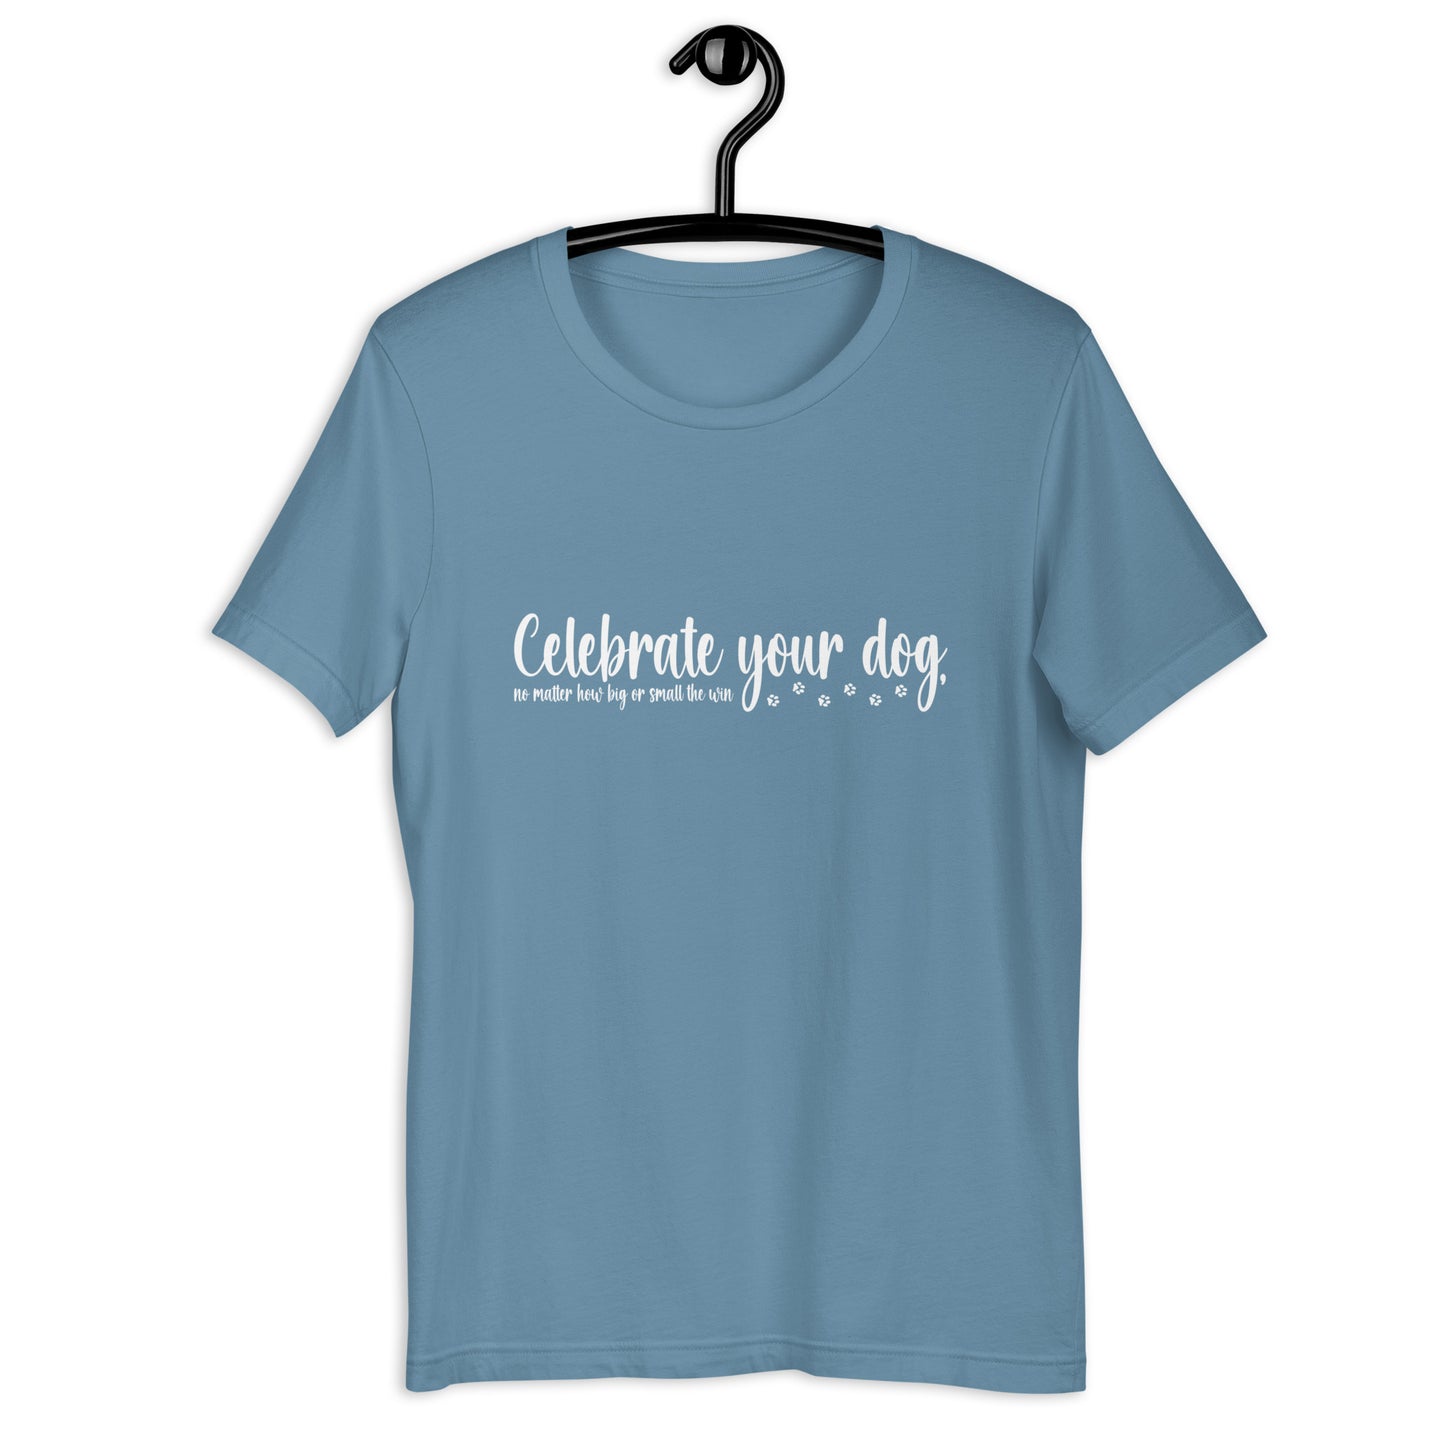 CELEBRATE YOUR DOG,no matter how big or small the win - Unisex t-shirt